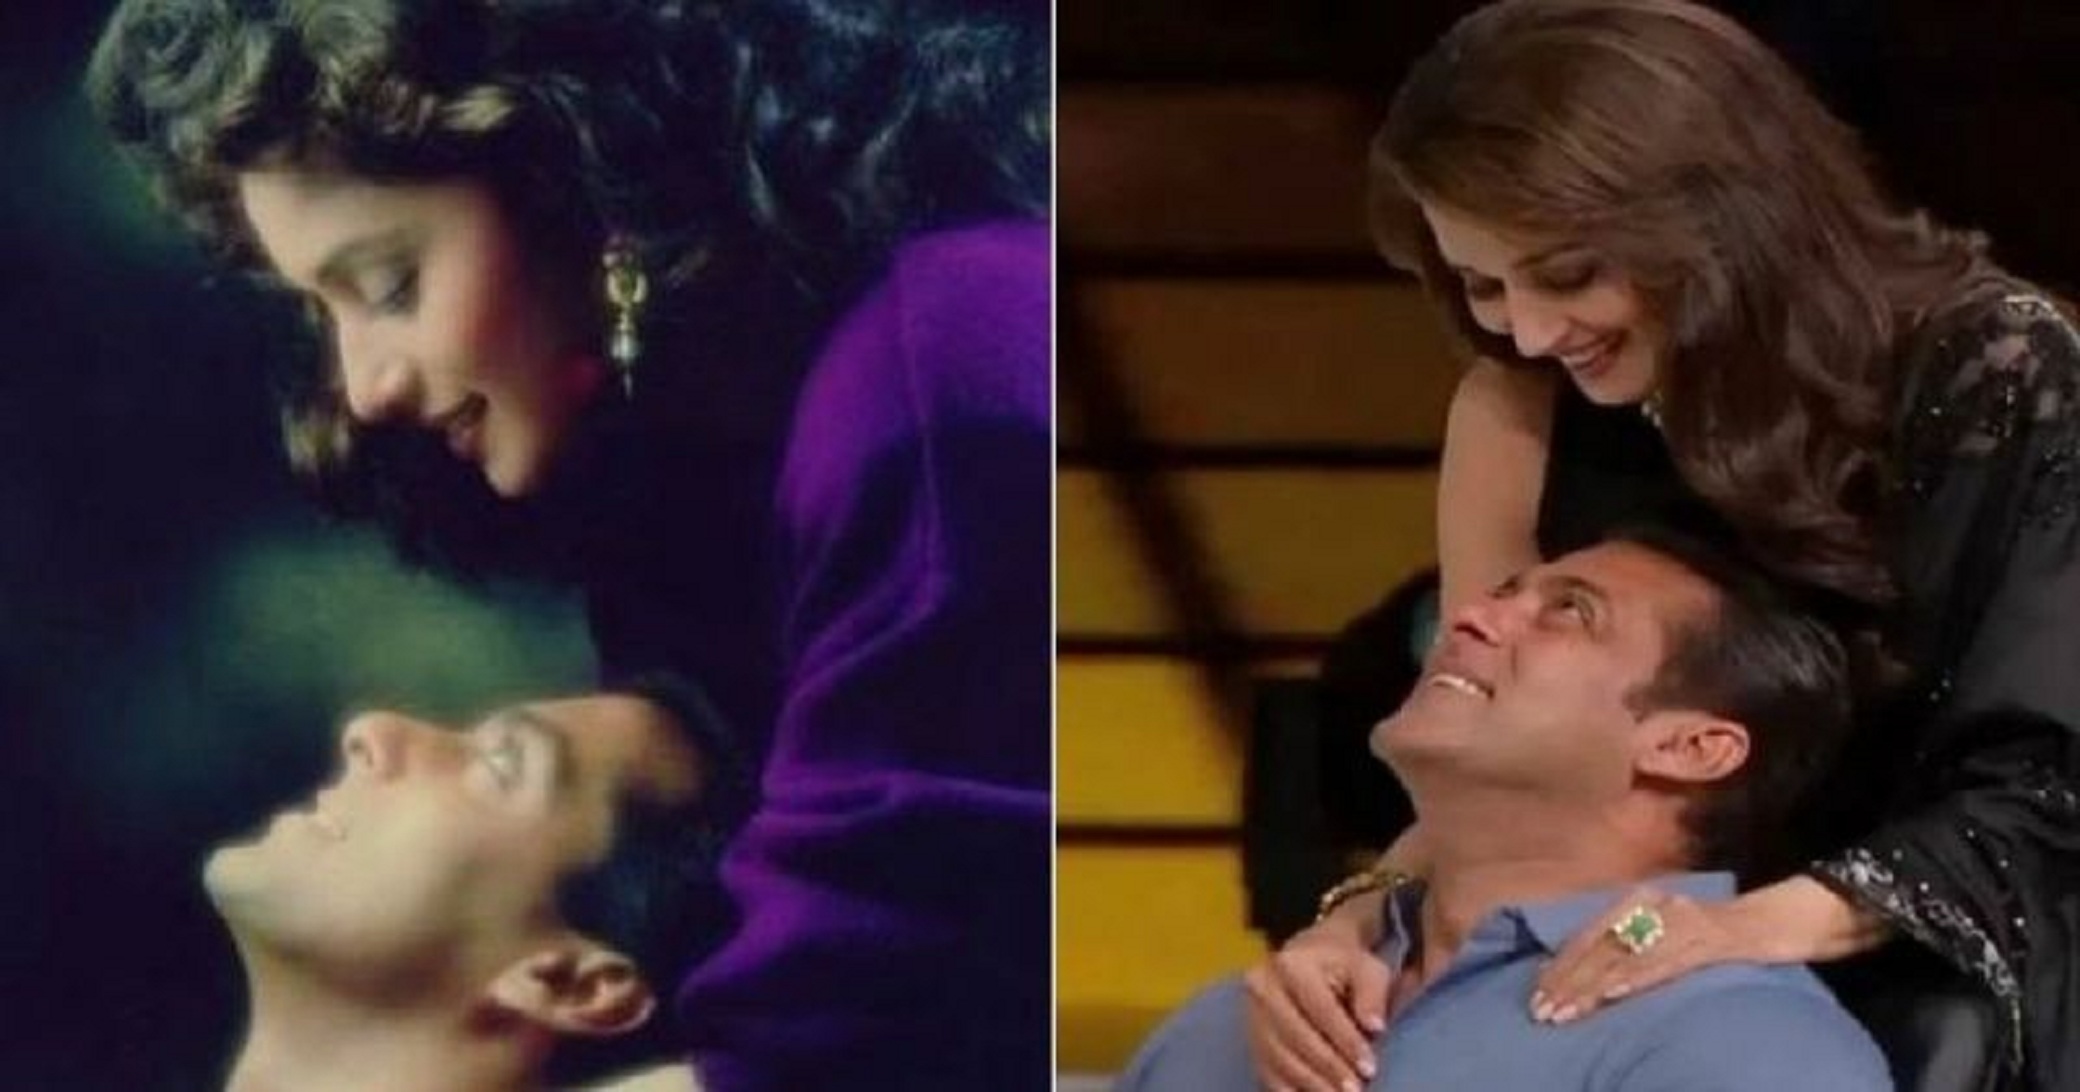 Salman and Madhuri recreate their iconic pose from ‘Hum Aapke Hain Koun’ and it took us back to the 90’s!